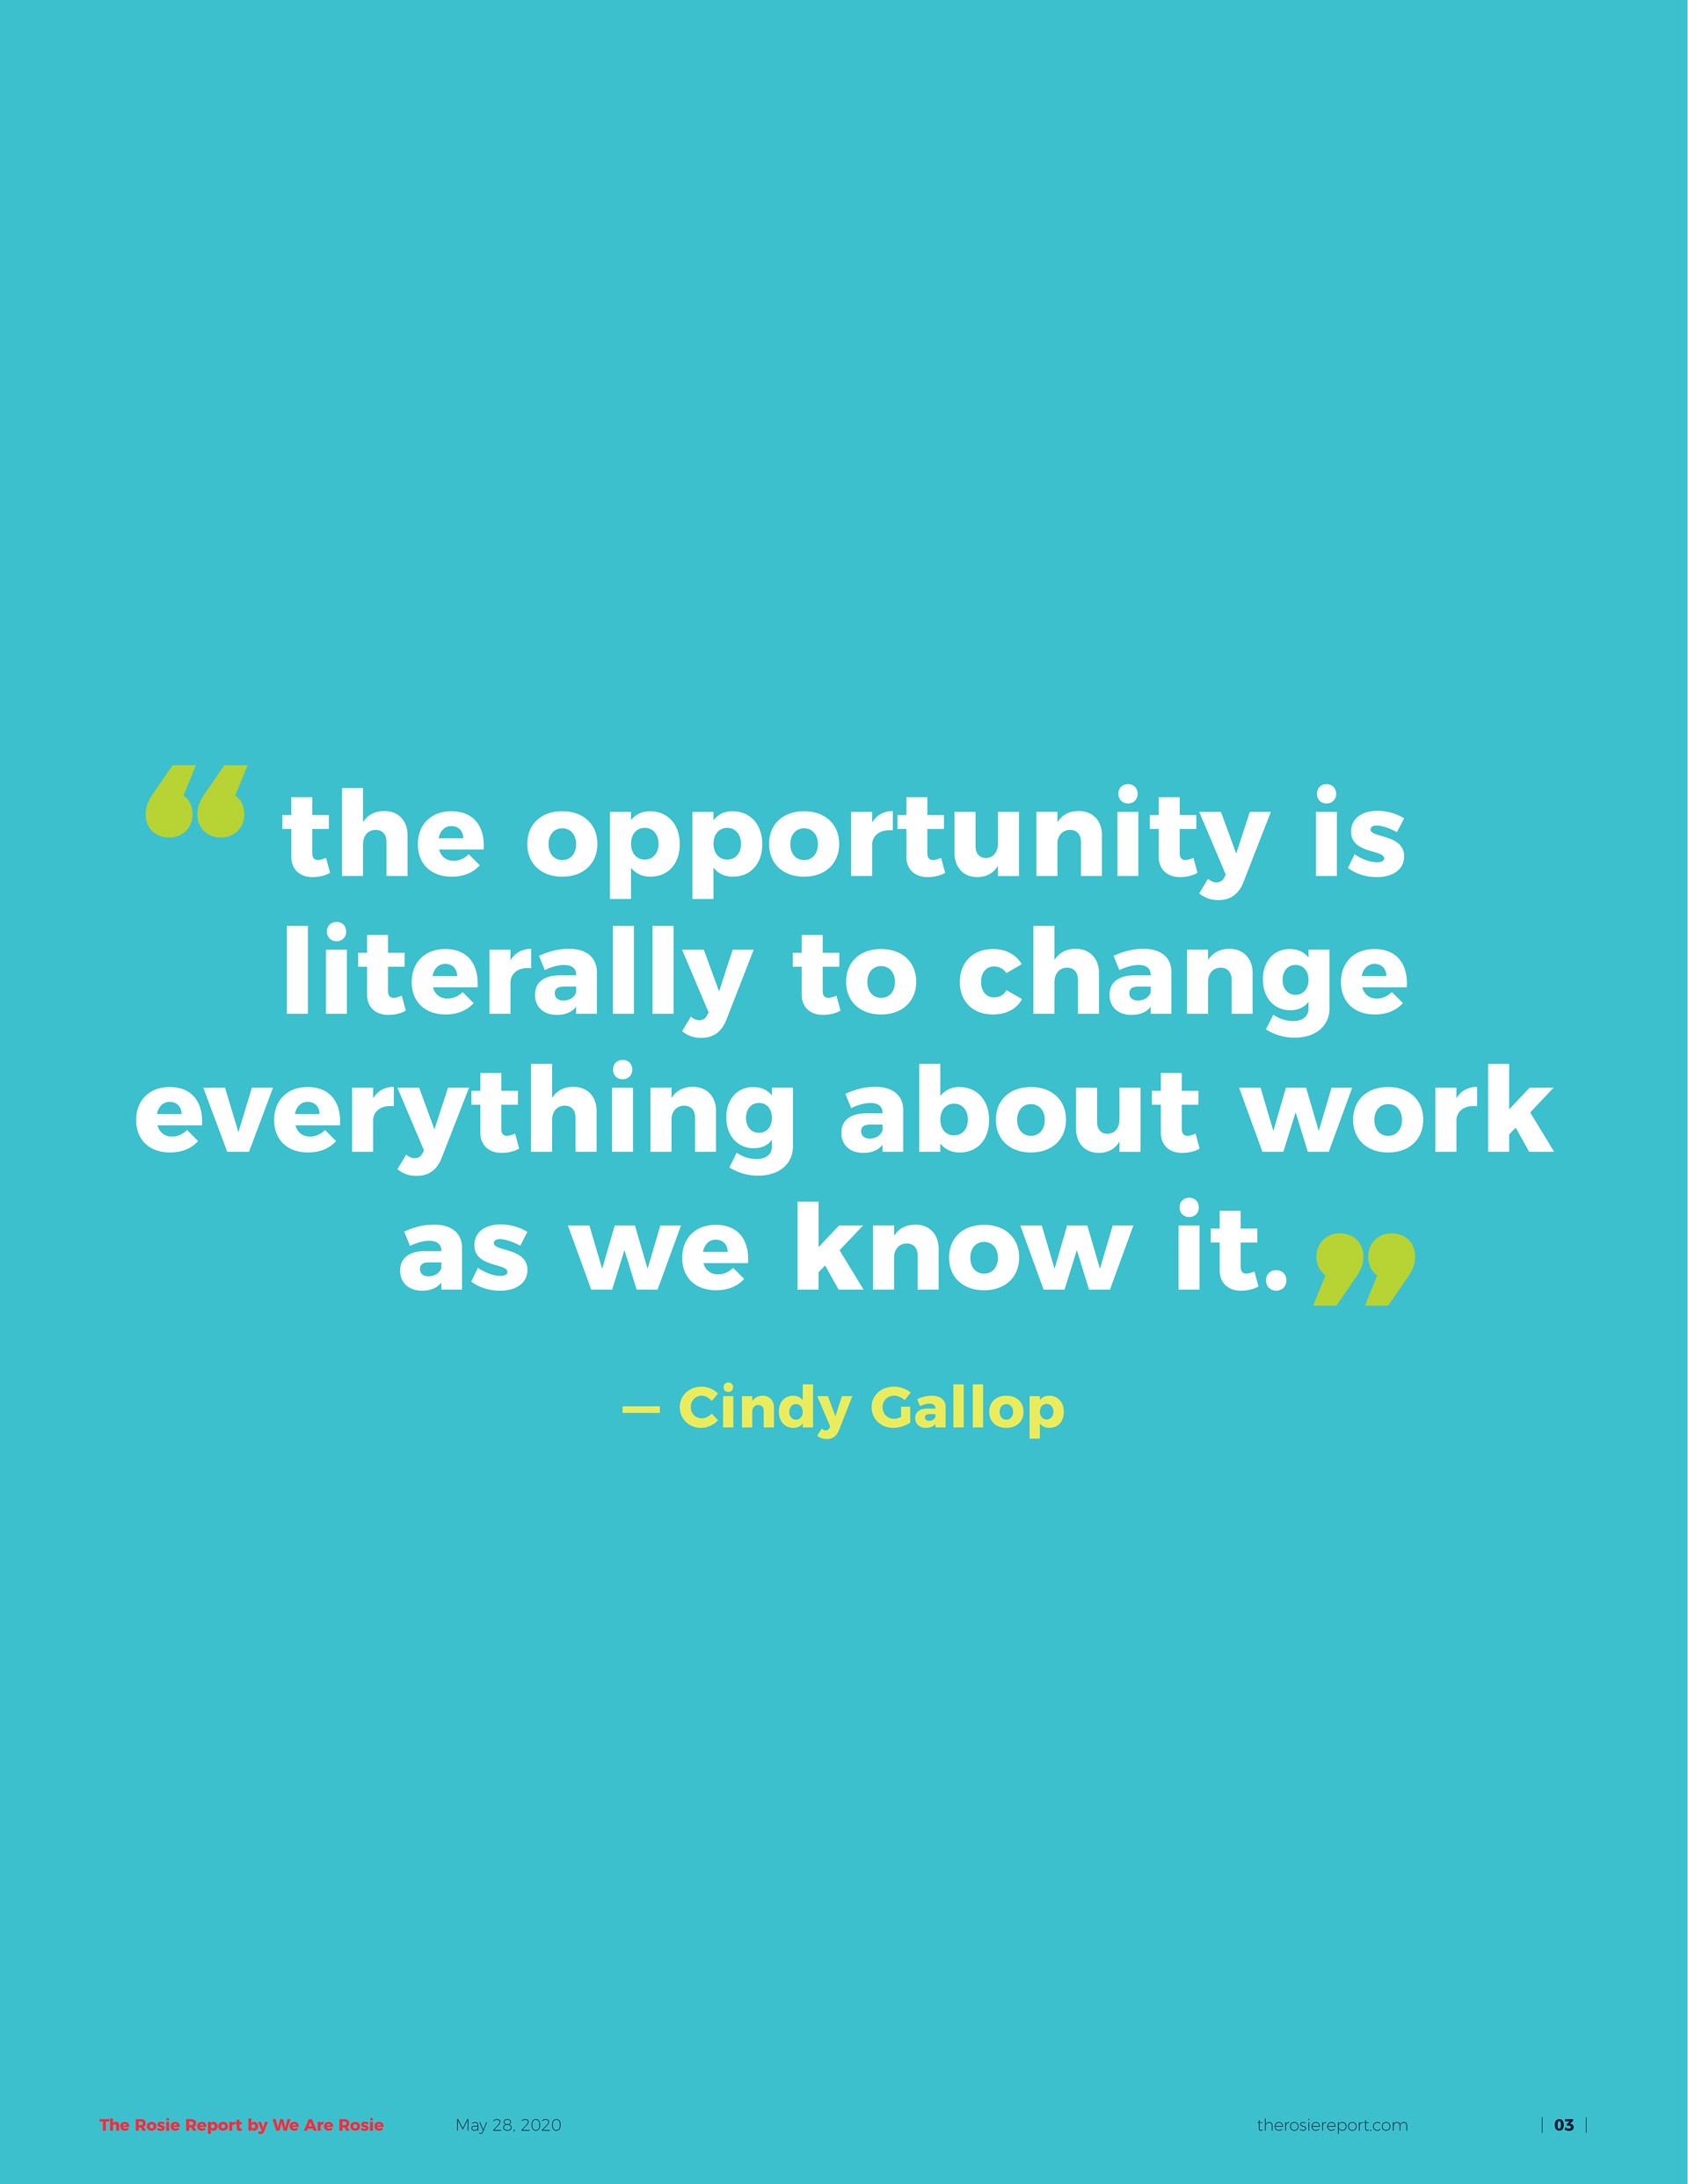 "The opportunity is literally to change everything about work as we know it."